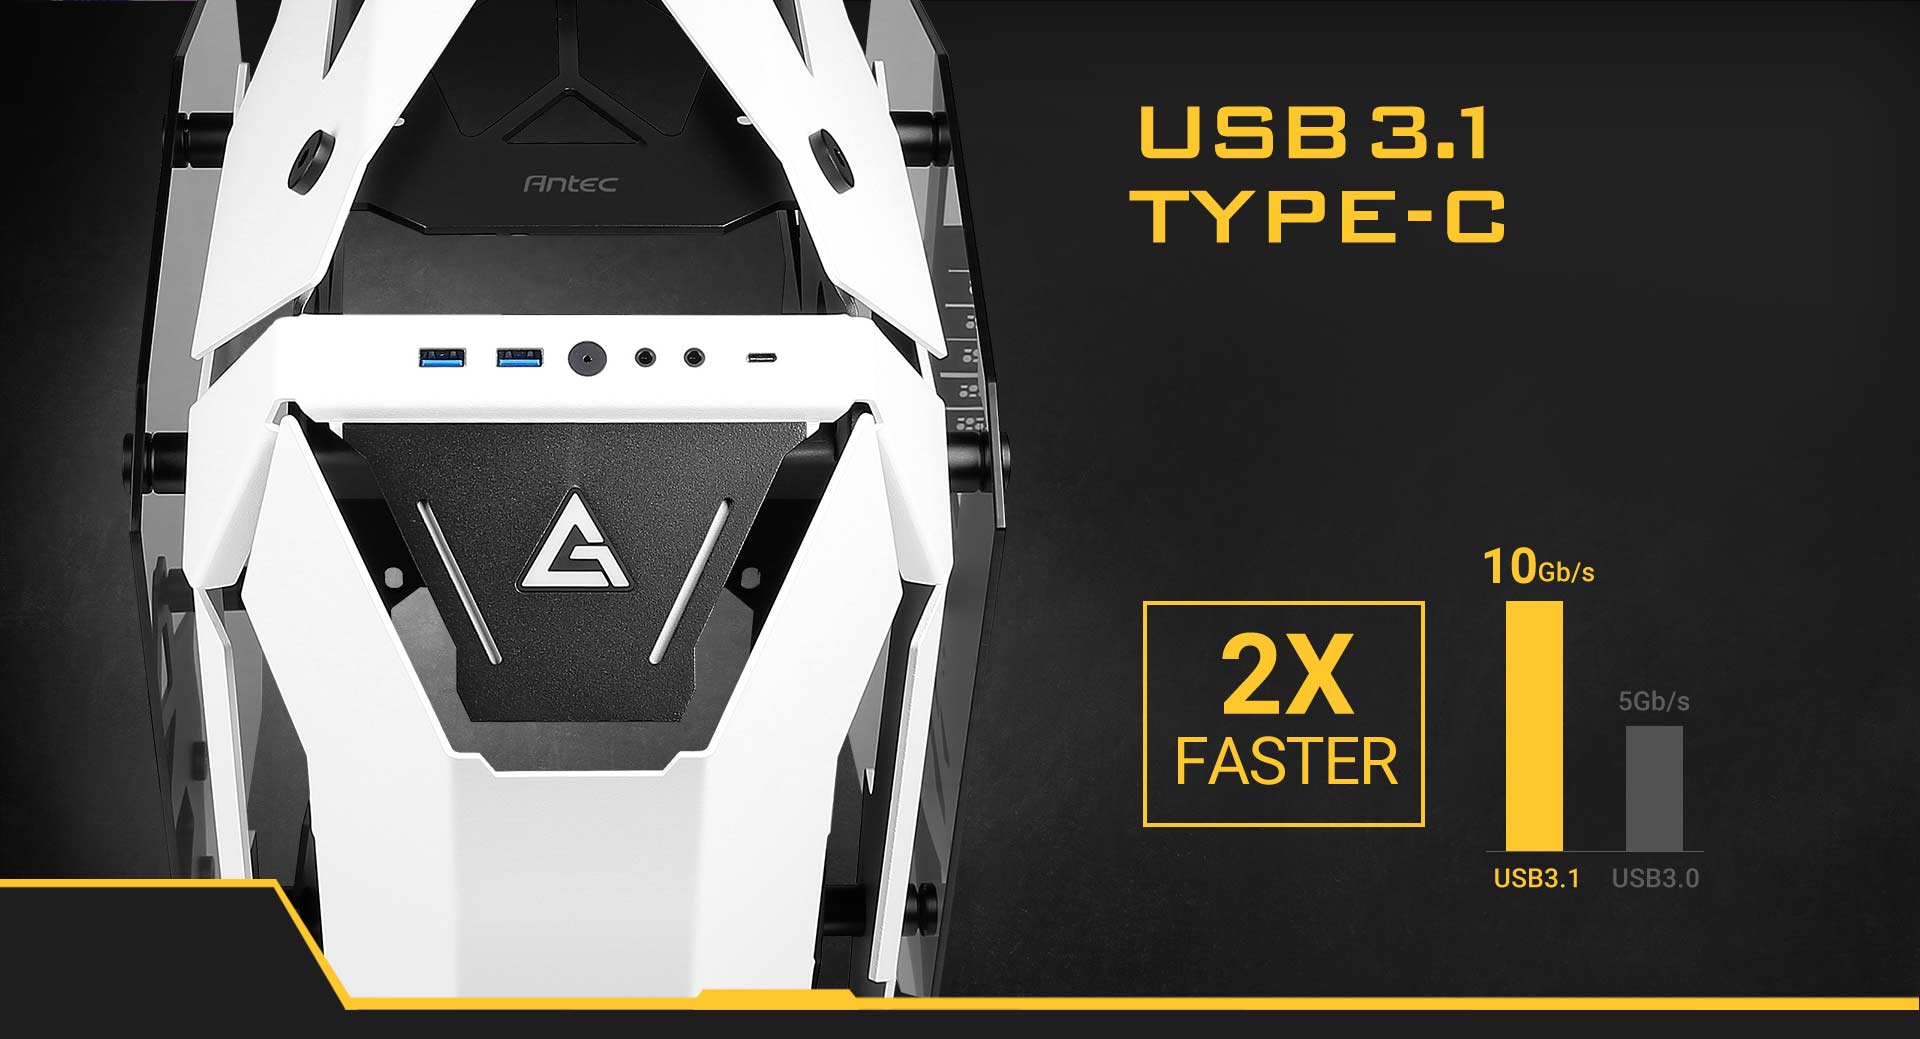 Antec Torque Closeup Facing Forward. There is text that reads: USB 3.1 TYPE-C and a Graph That Shows USB 3.1 is 2 Times Faster than USB 3.0